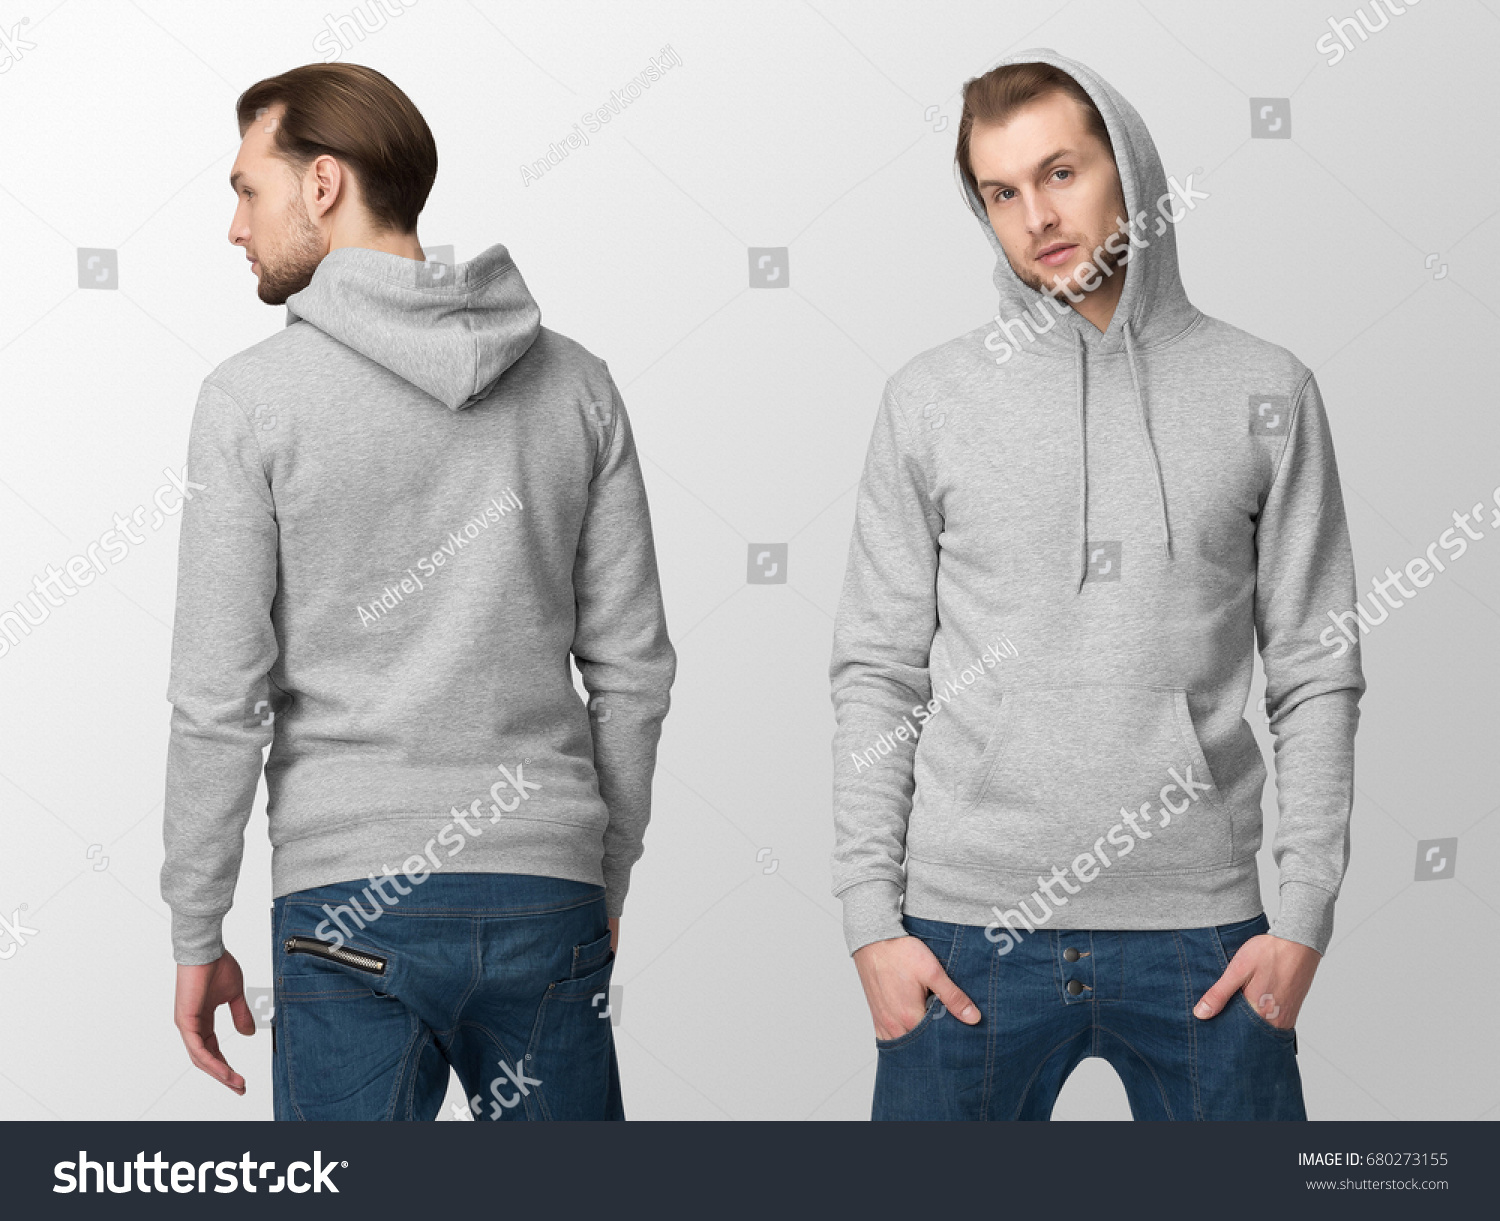 Download Heather Grey Hoodie On Young Man Stock Photo 680273155 ...